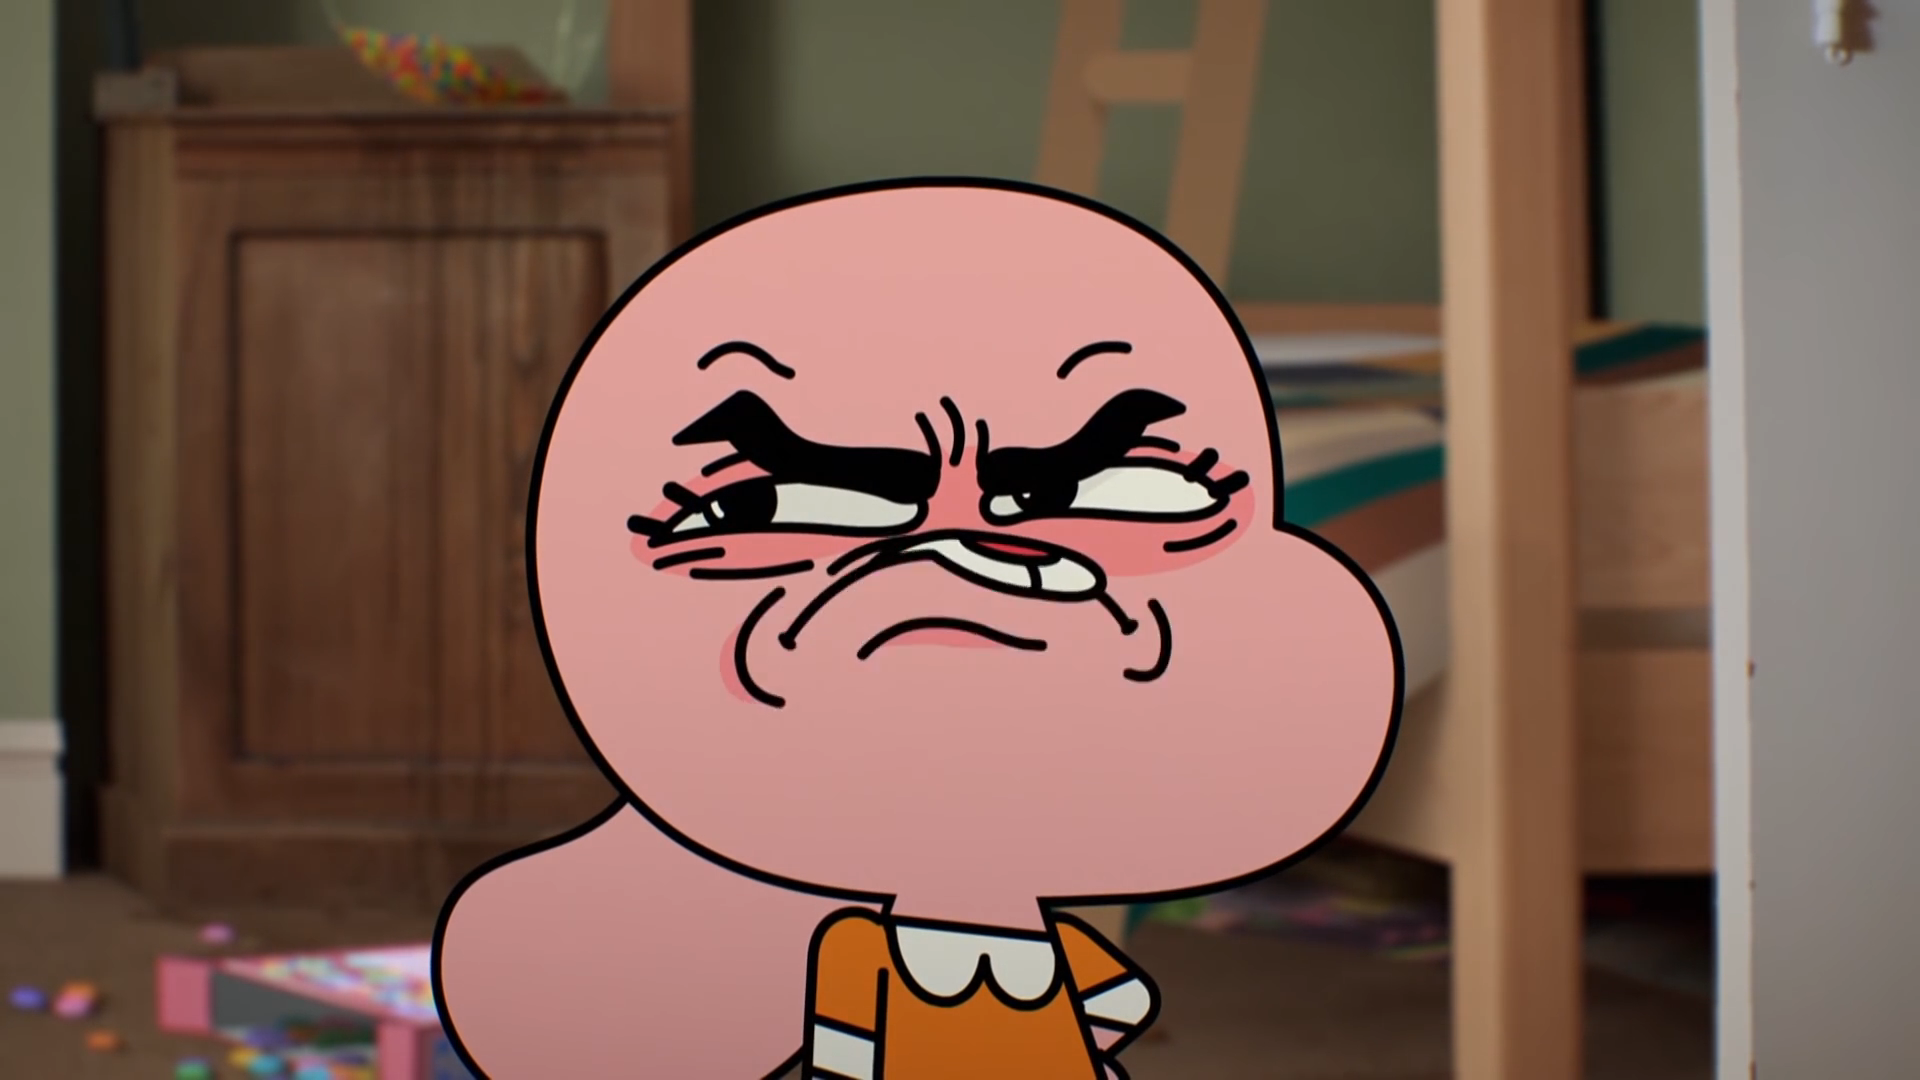 Image Detective Png The Amazing World Of Gumball Wiki Fandom Powered By Wikia